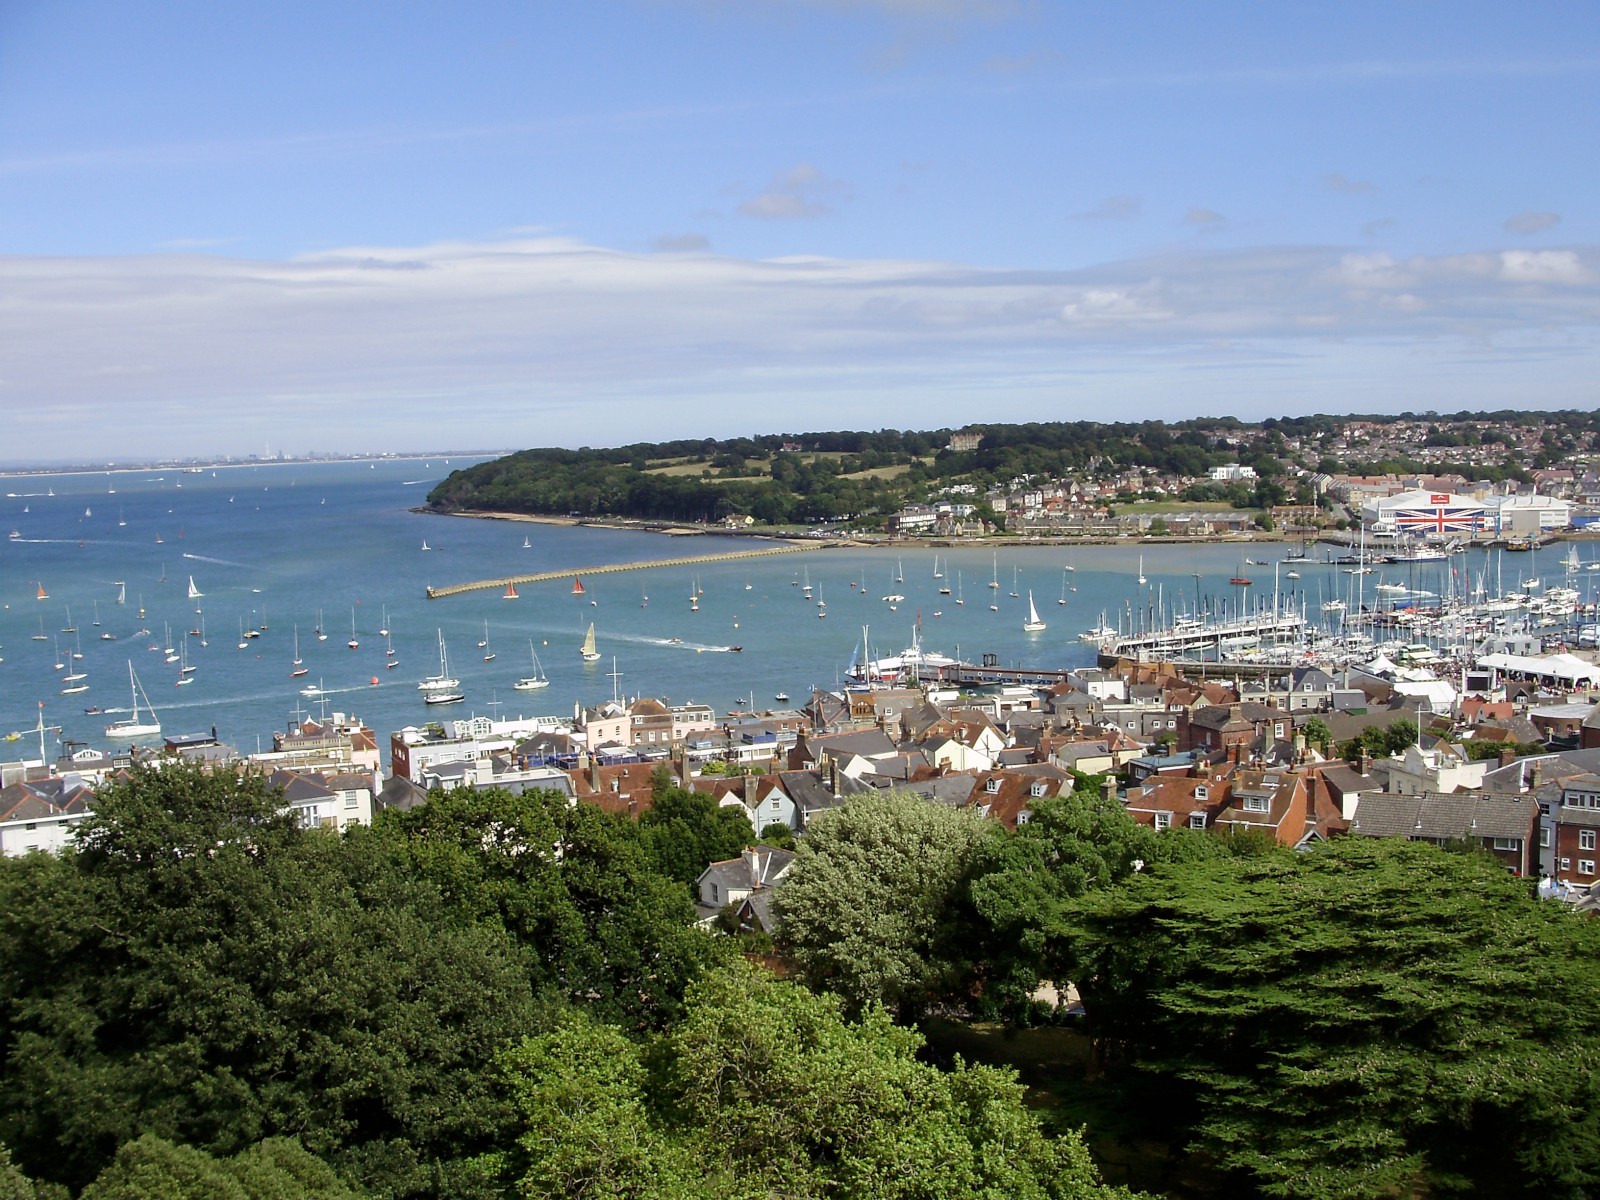 Image of Cowes